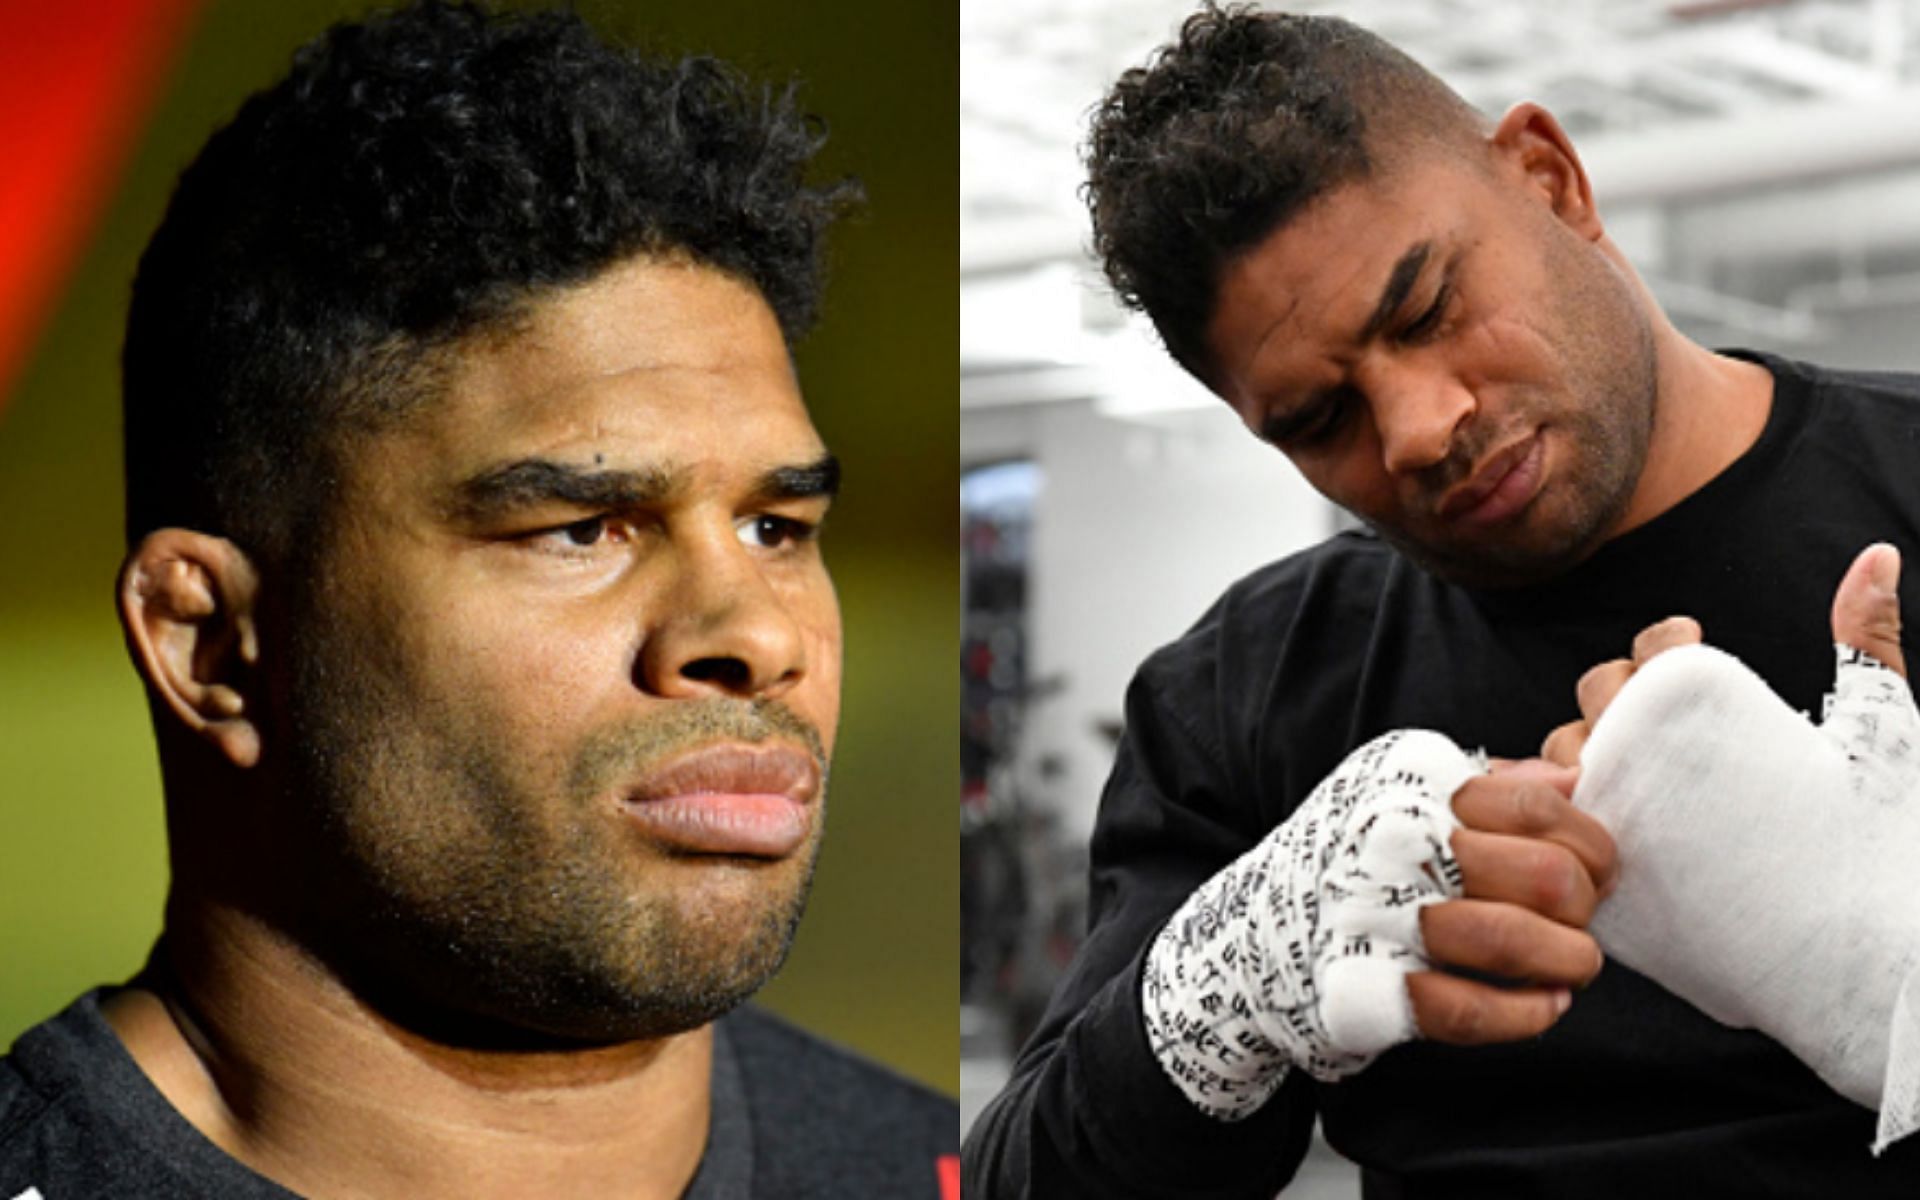 Alistair Overeem has competed in several martial arts organizations the world over